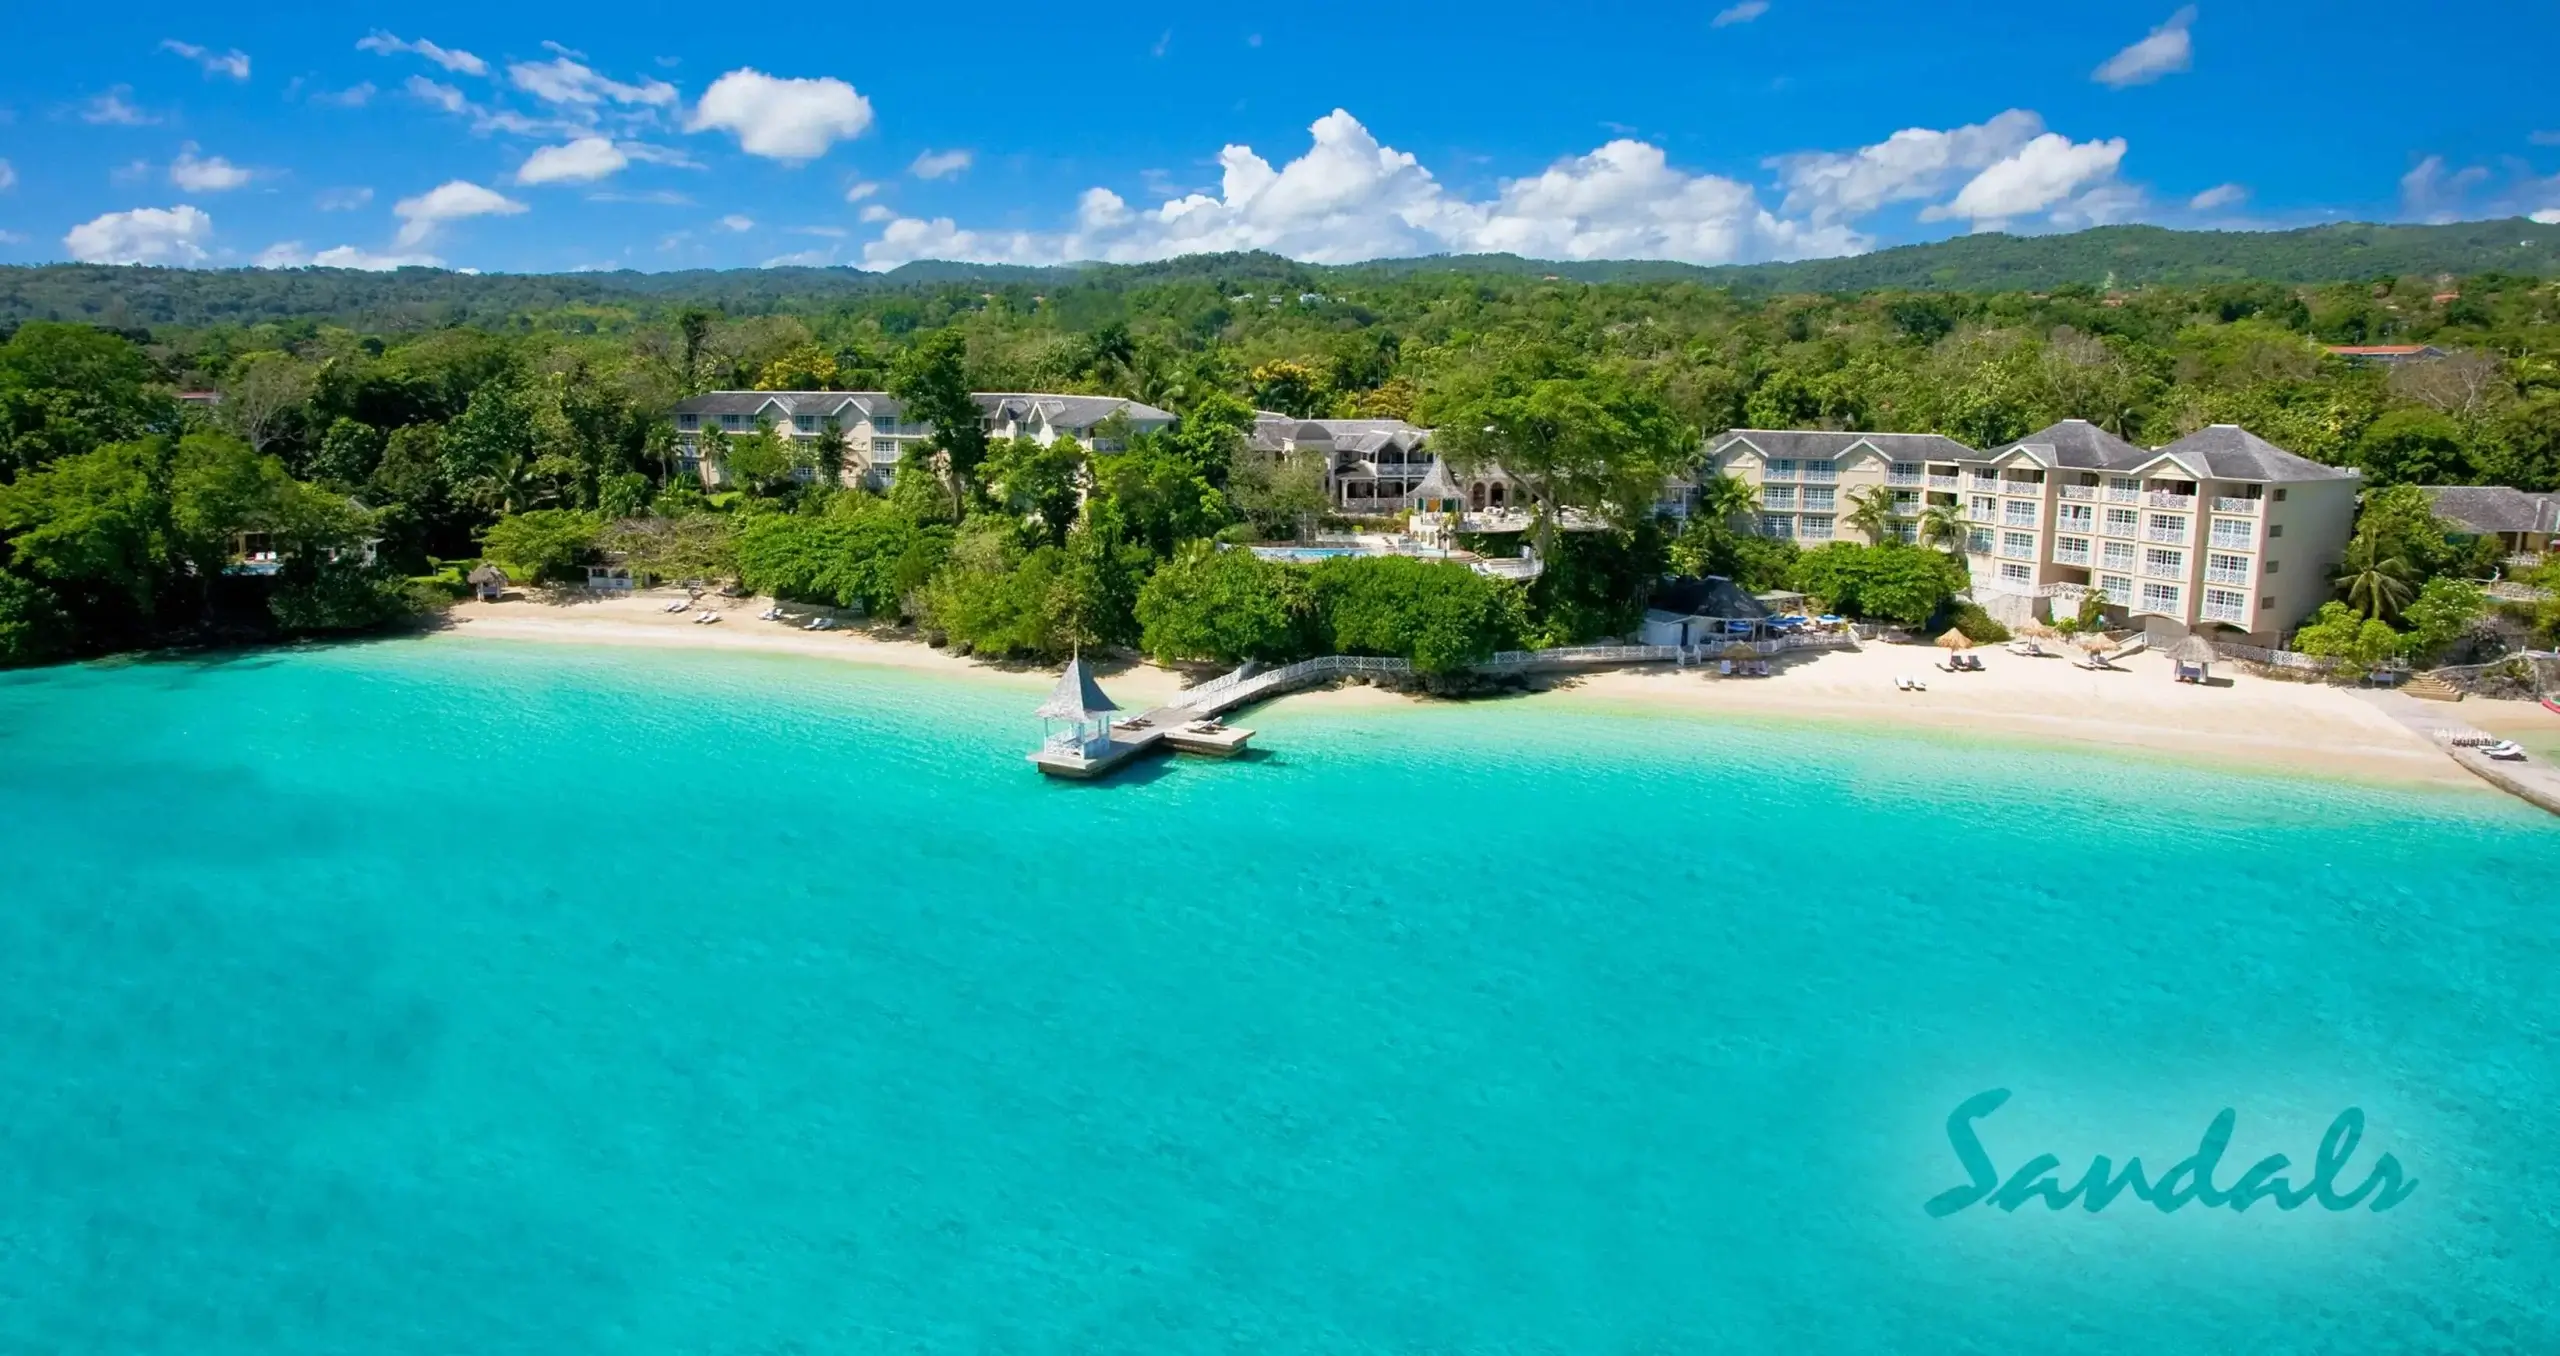 Sandals Royal Plantation in Jamaica with white sand beach and clear blue water. 